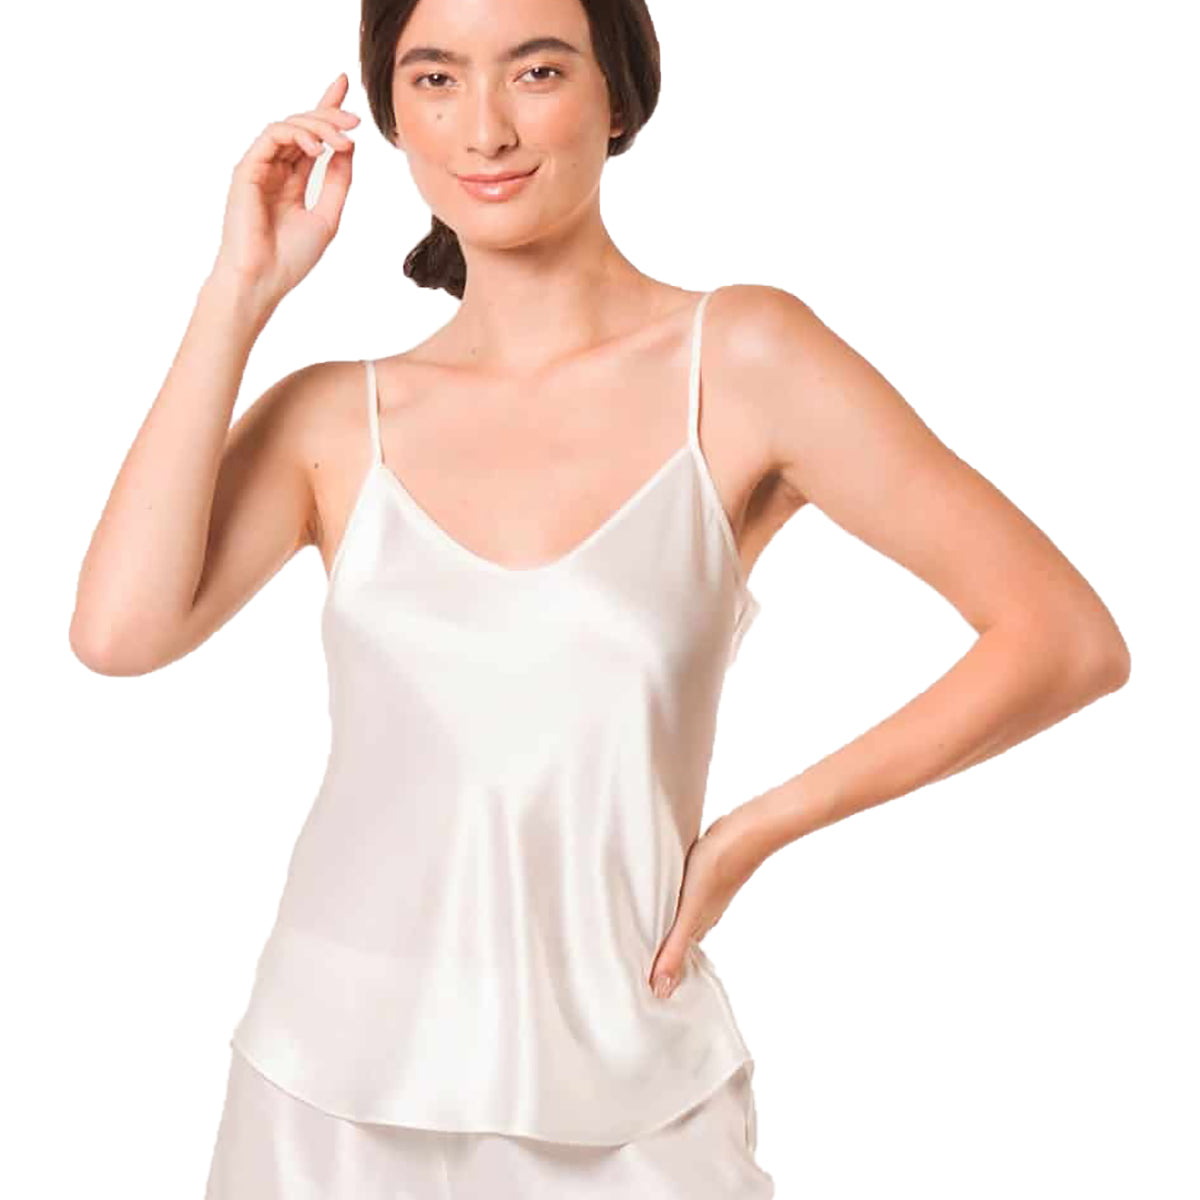 Westside - Cotton camisoles for the woman who values comfort- Shop